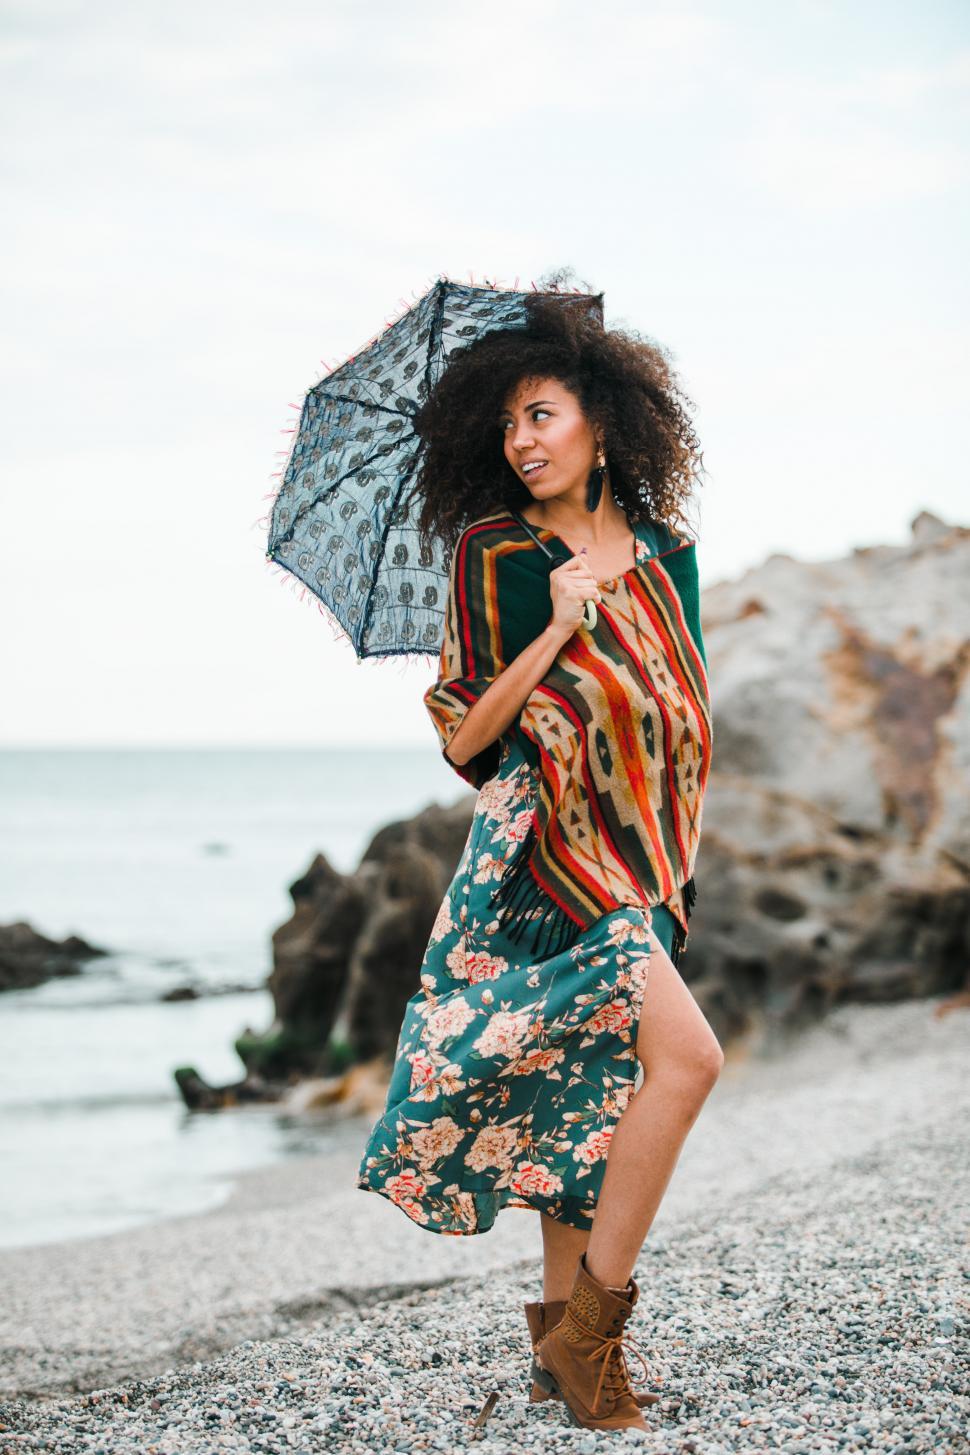 Free Image of black girl in an elegant dress in the shore with an umbrella 